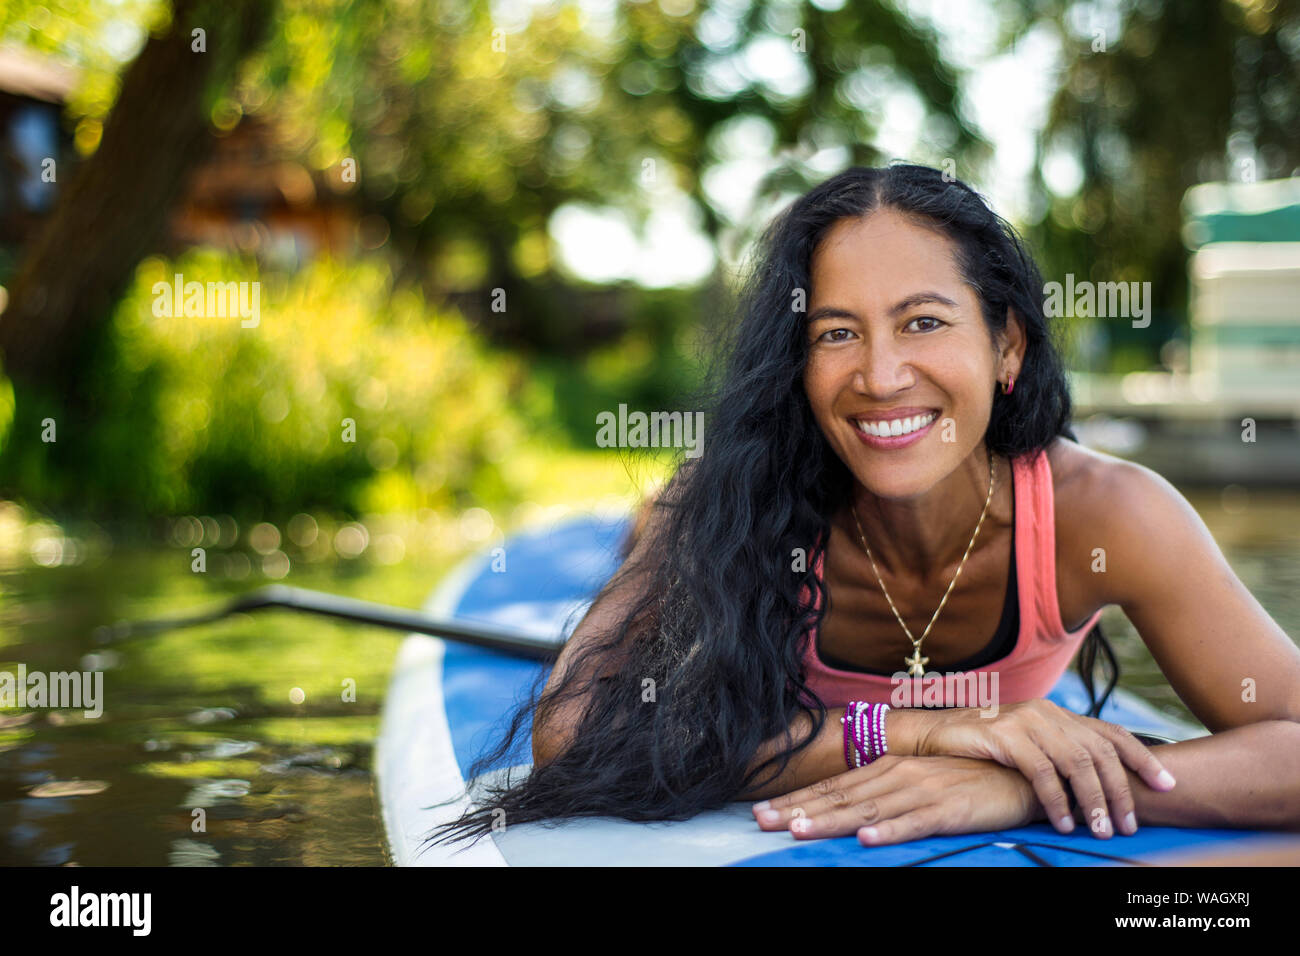 Mid adult woman prepares for paddleboarding. Stock Photo